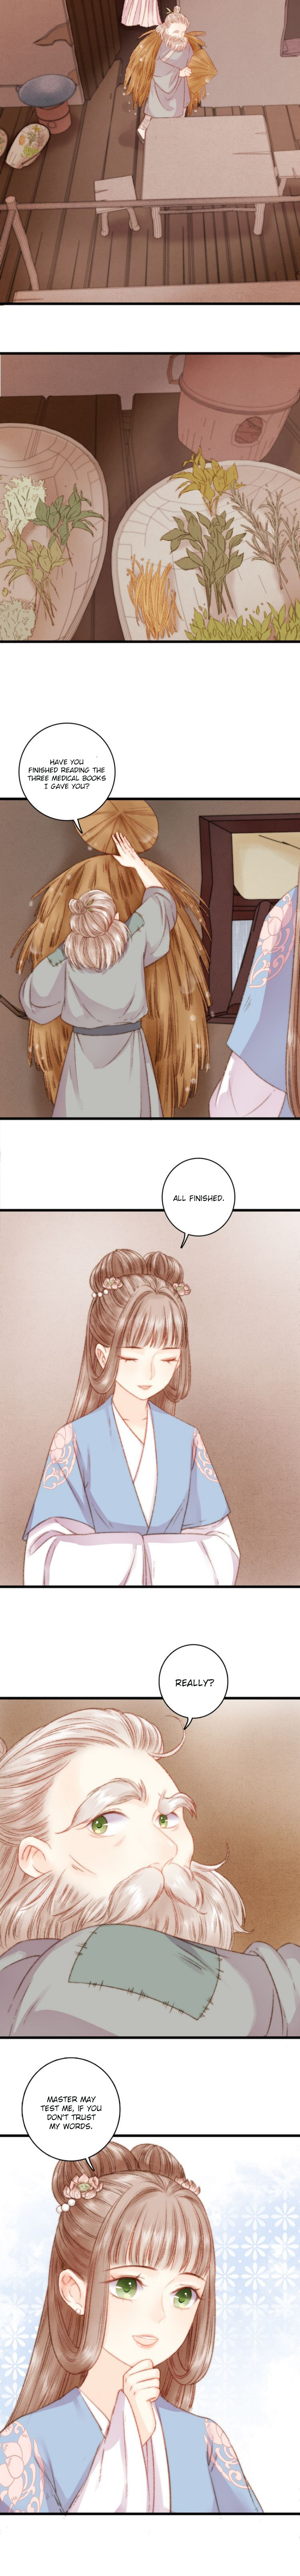 The Goddess of Healing chapter 14